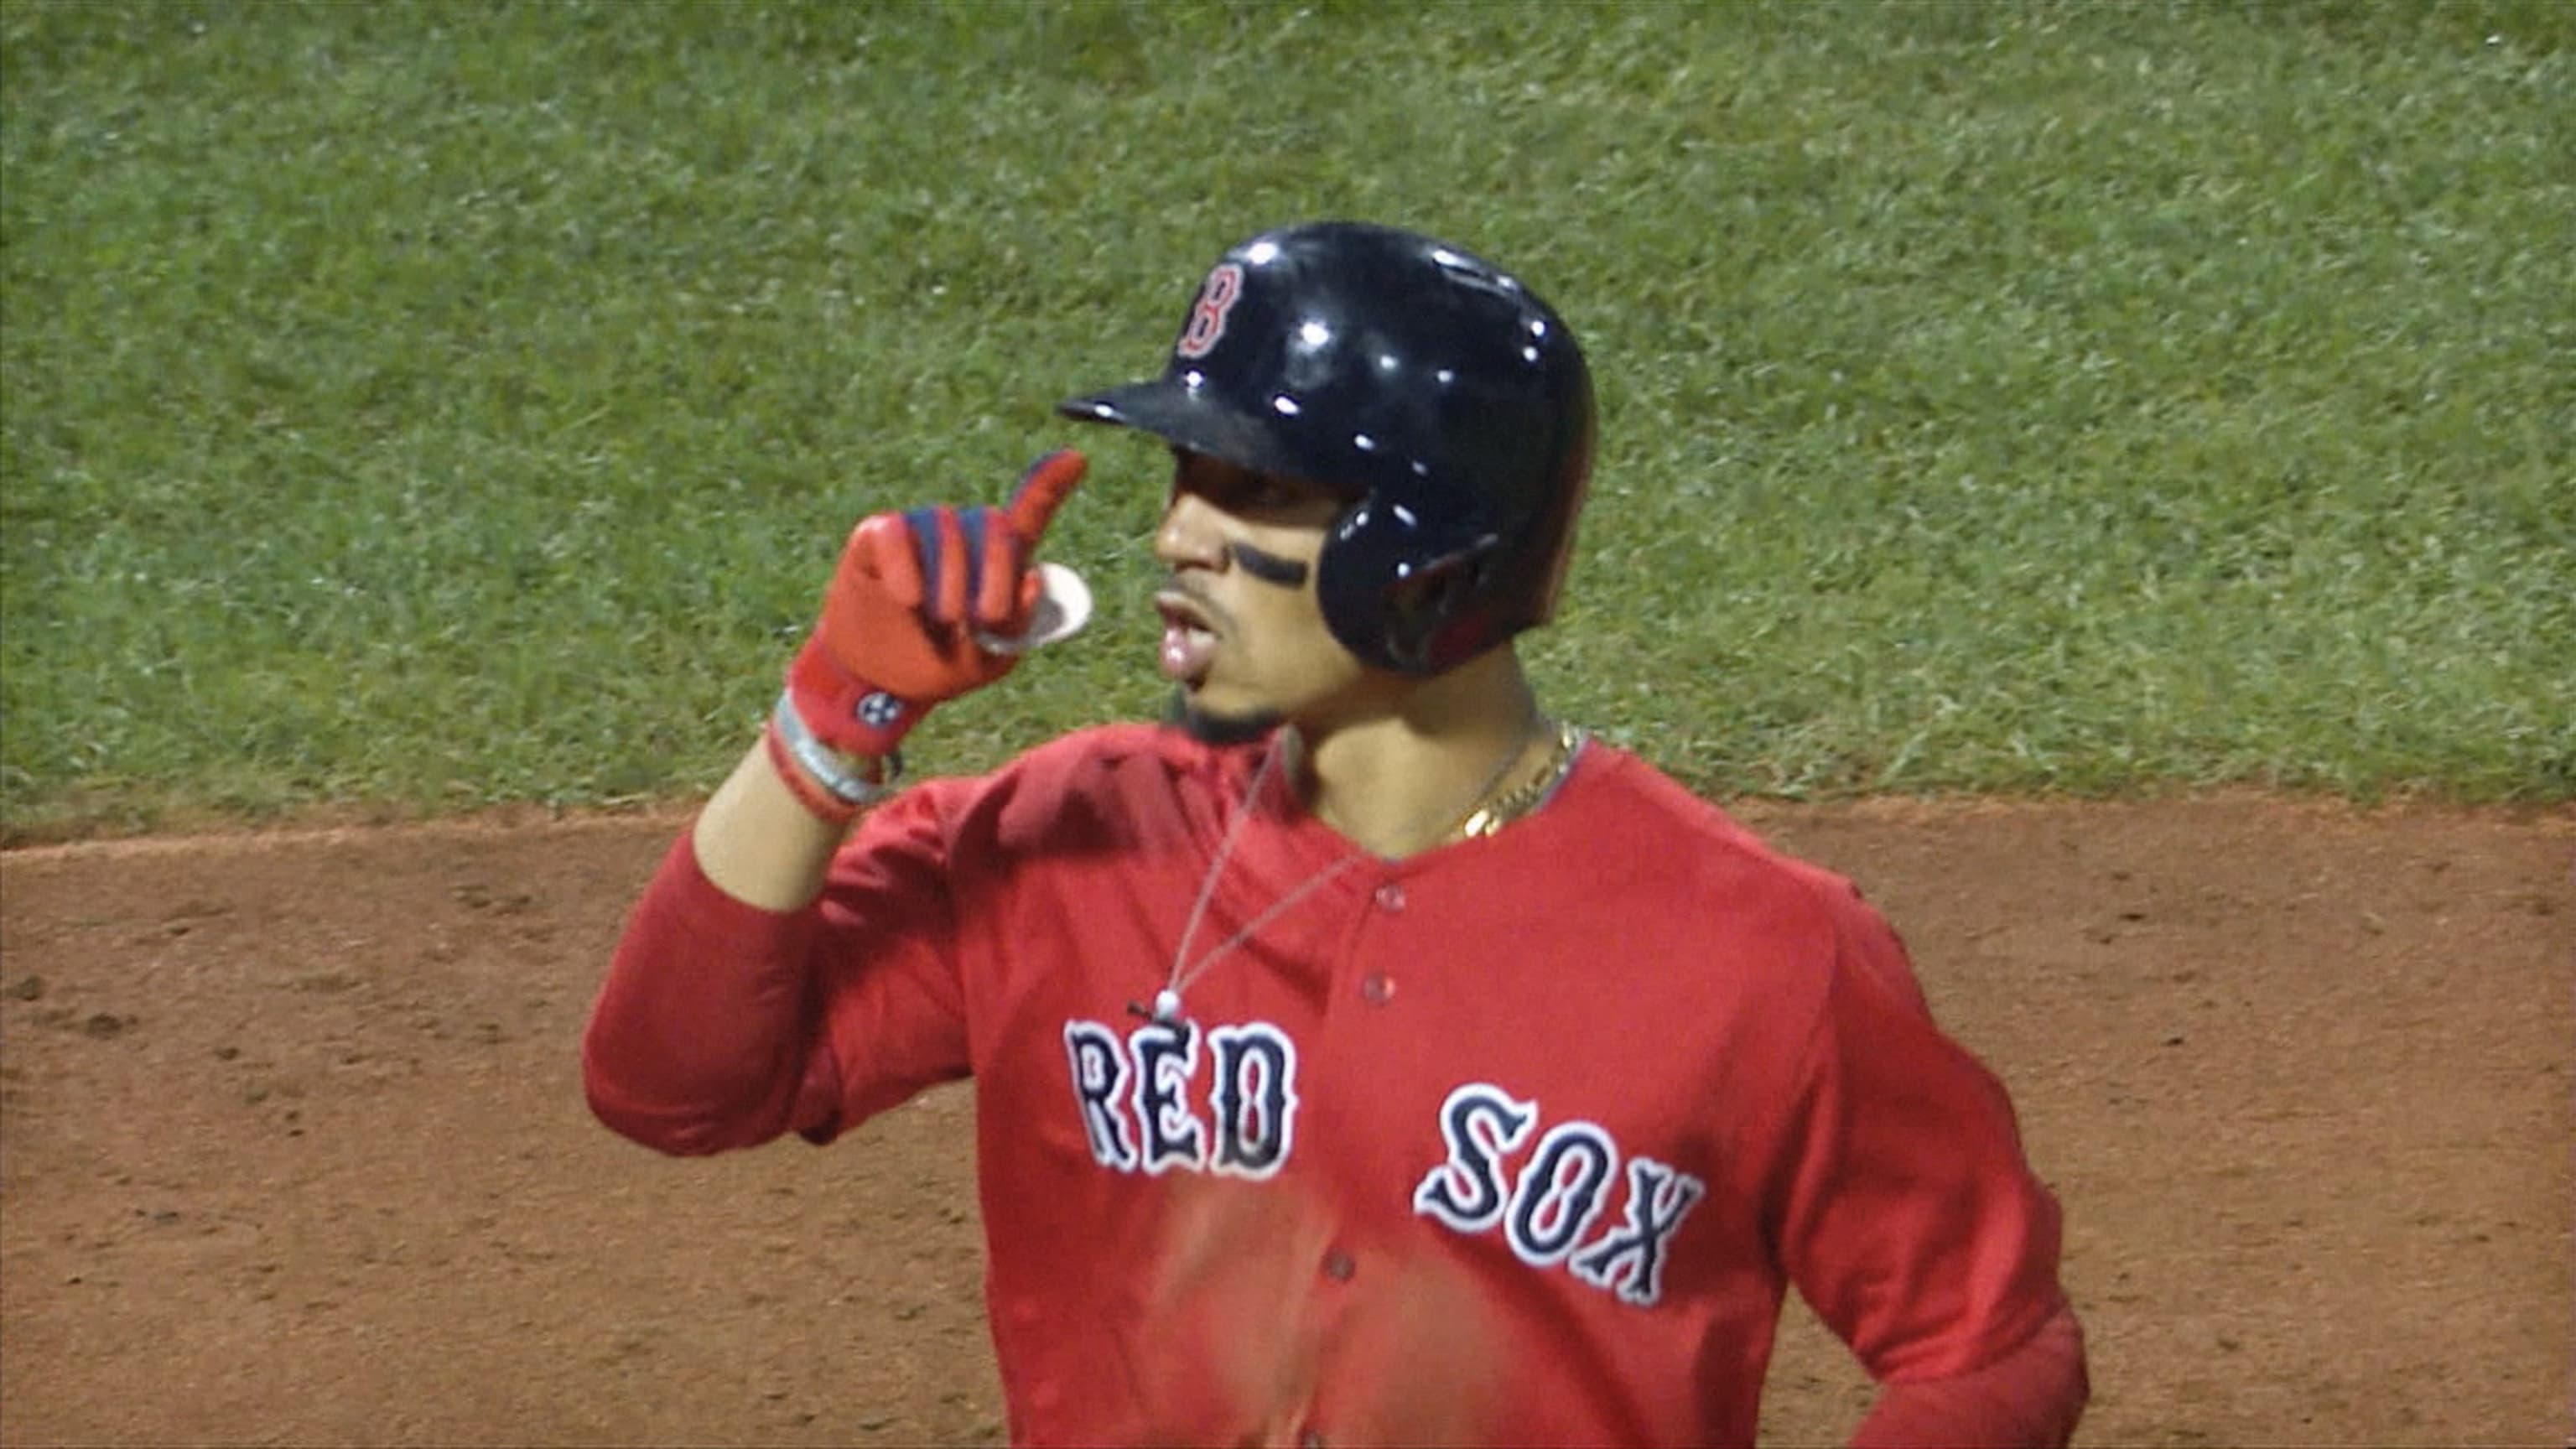 mookie betts red jersey